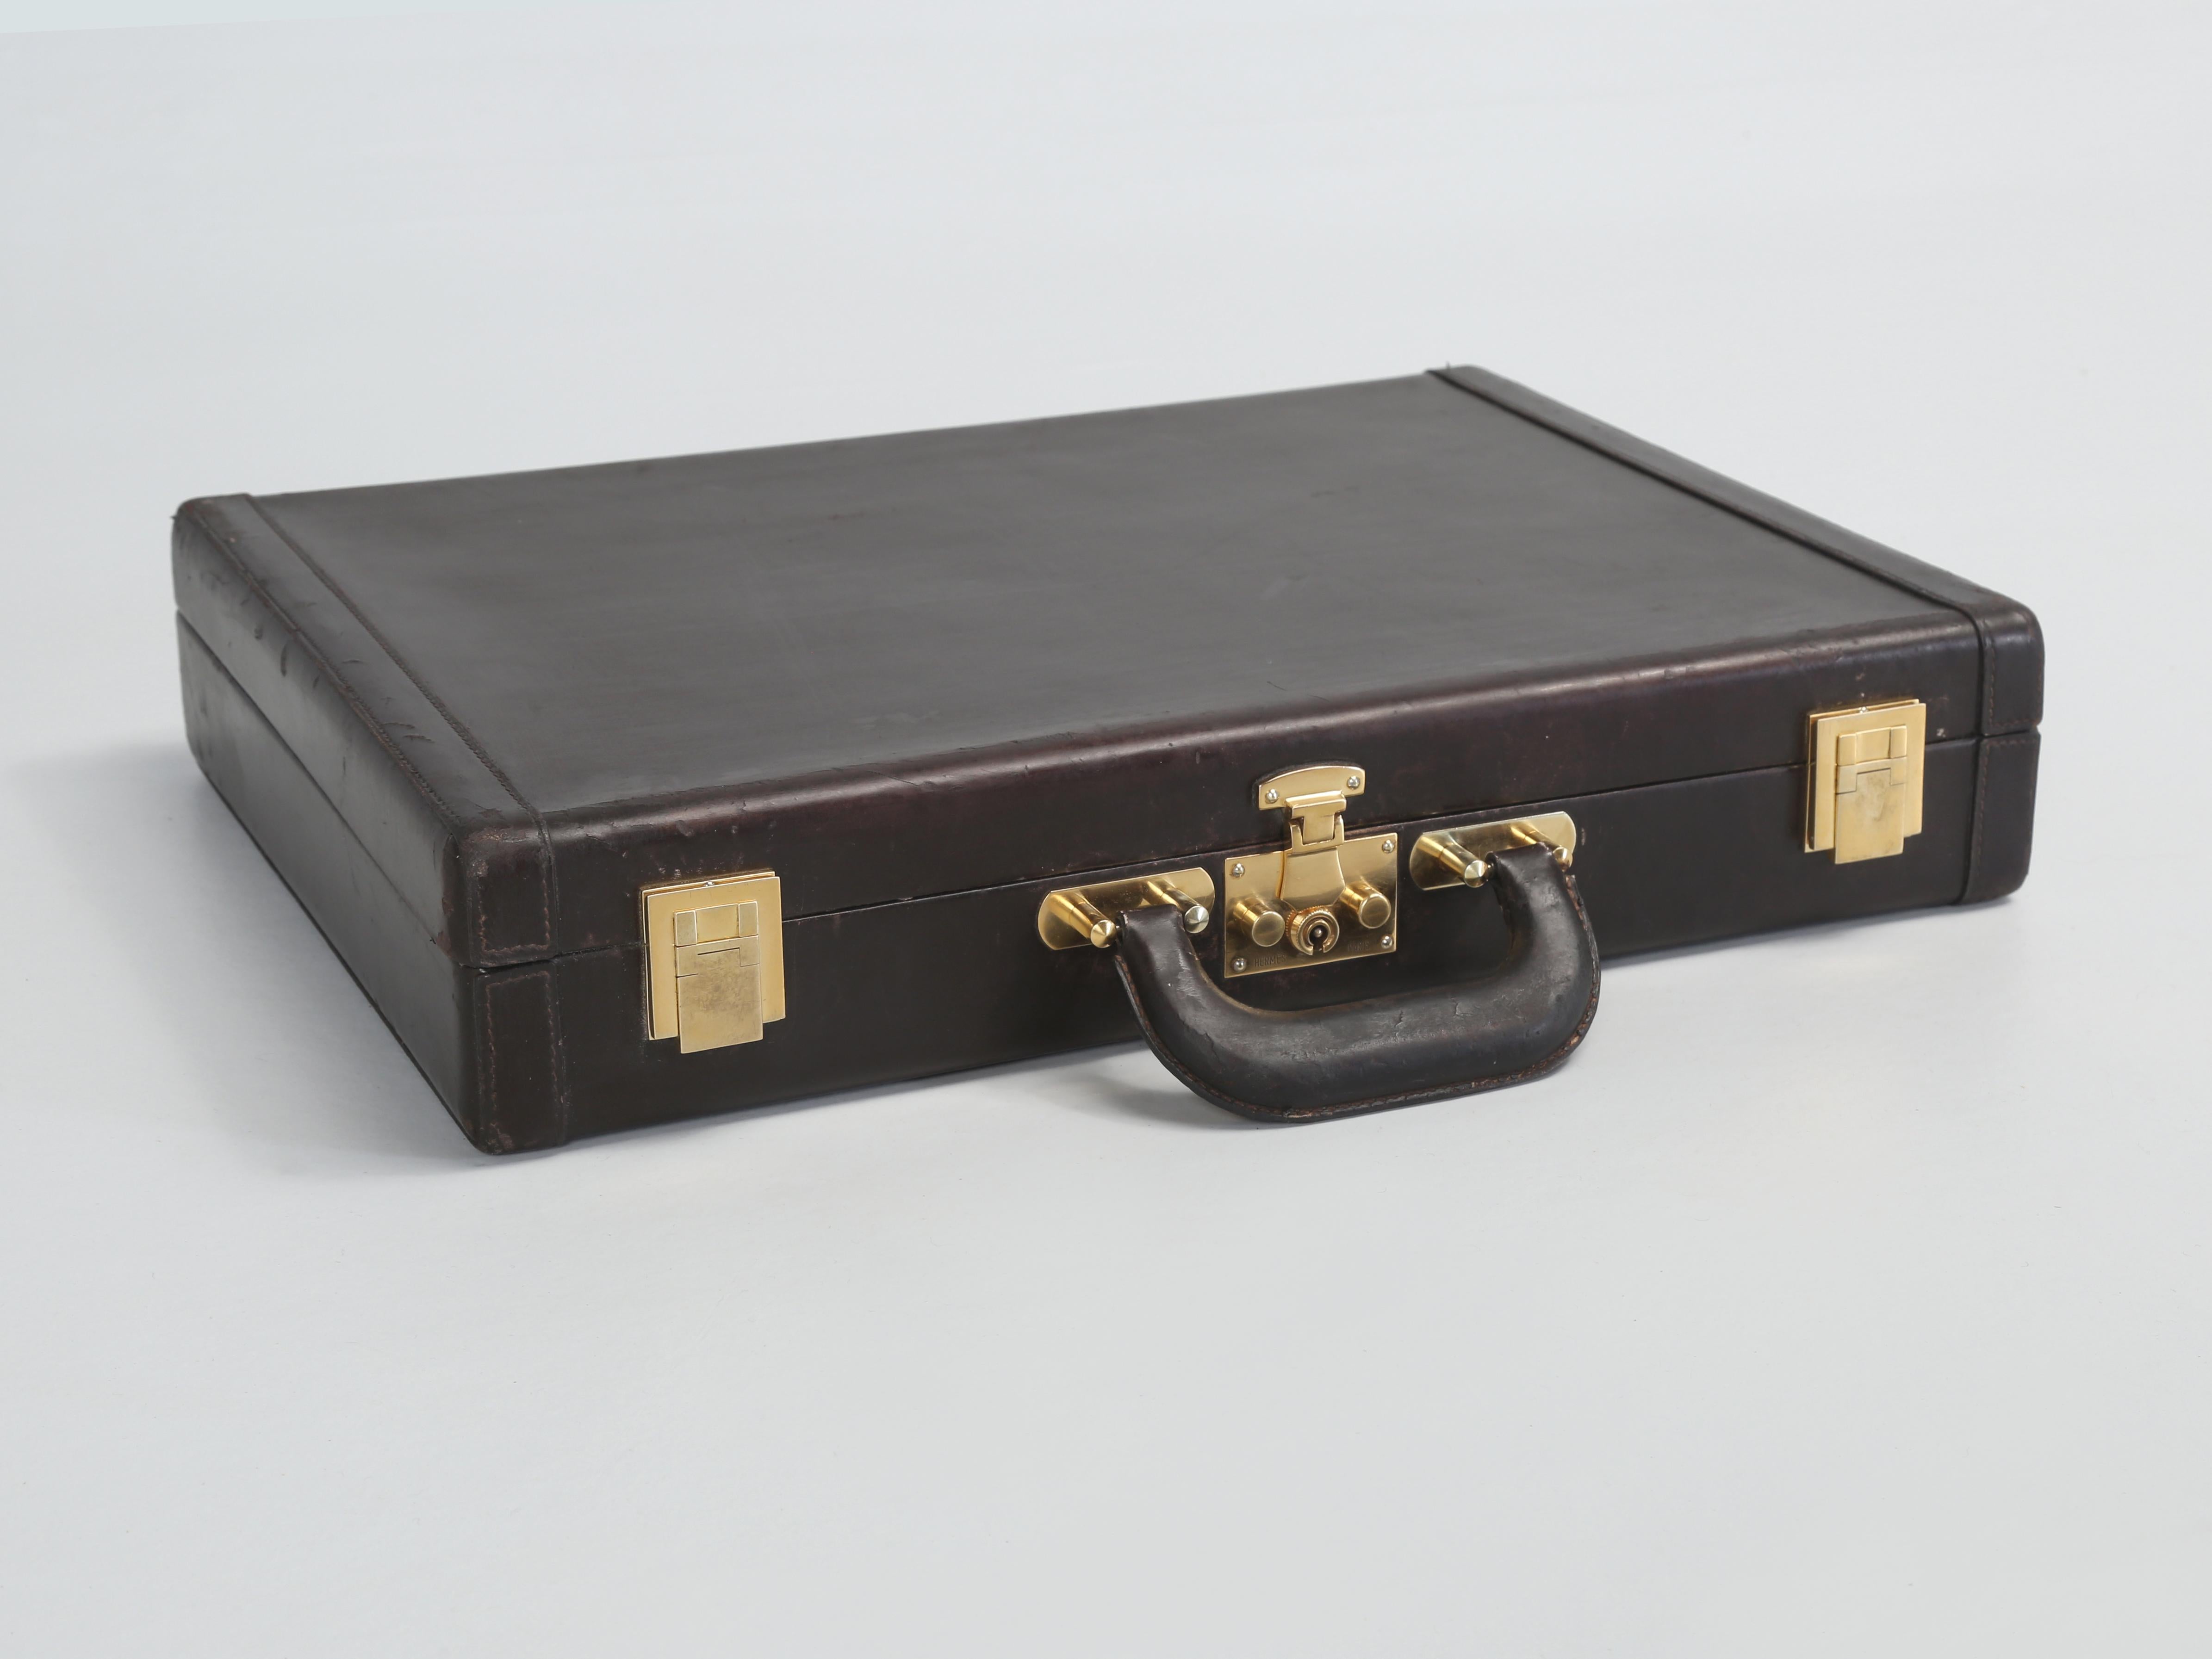 Hermès Men's Briefcase or Attaché Case in chocolate brown leather with gold fittings. 
Hermès originally began as a producer of high-end leather equestrian accessories for European noblemen. In the late 1830's French entrepreneur Thierry Hermès